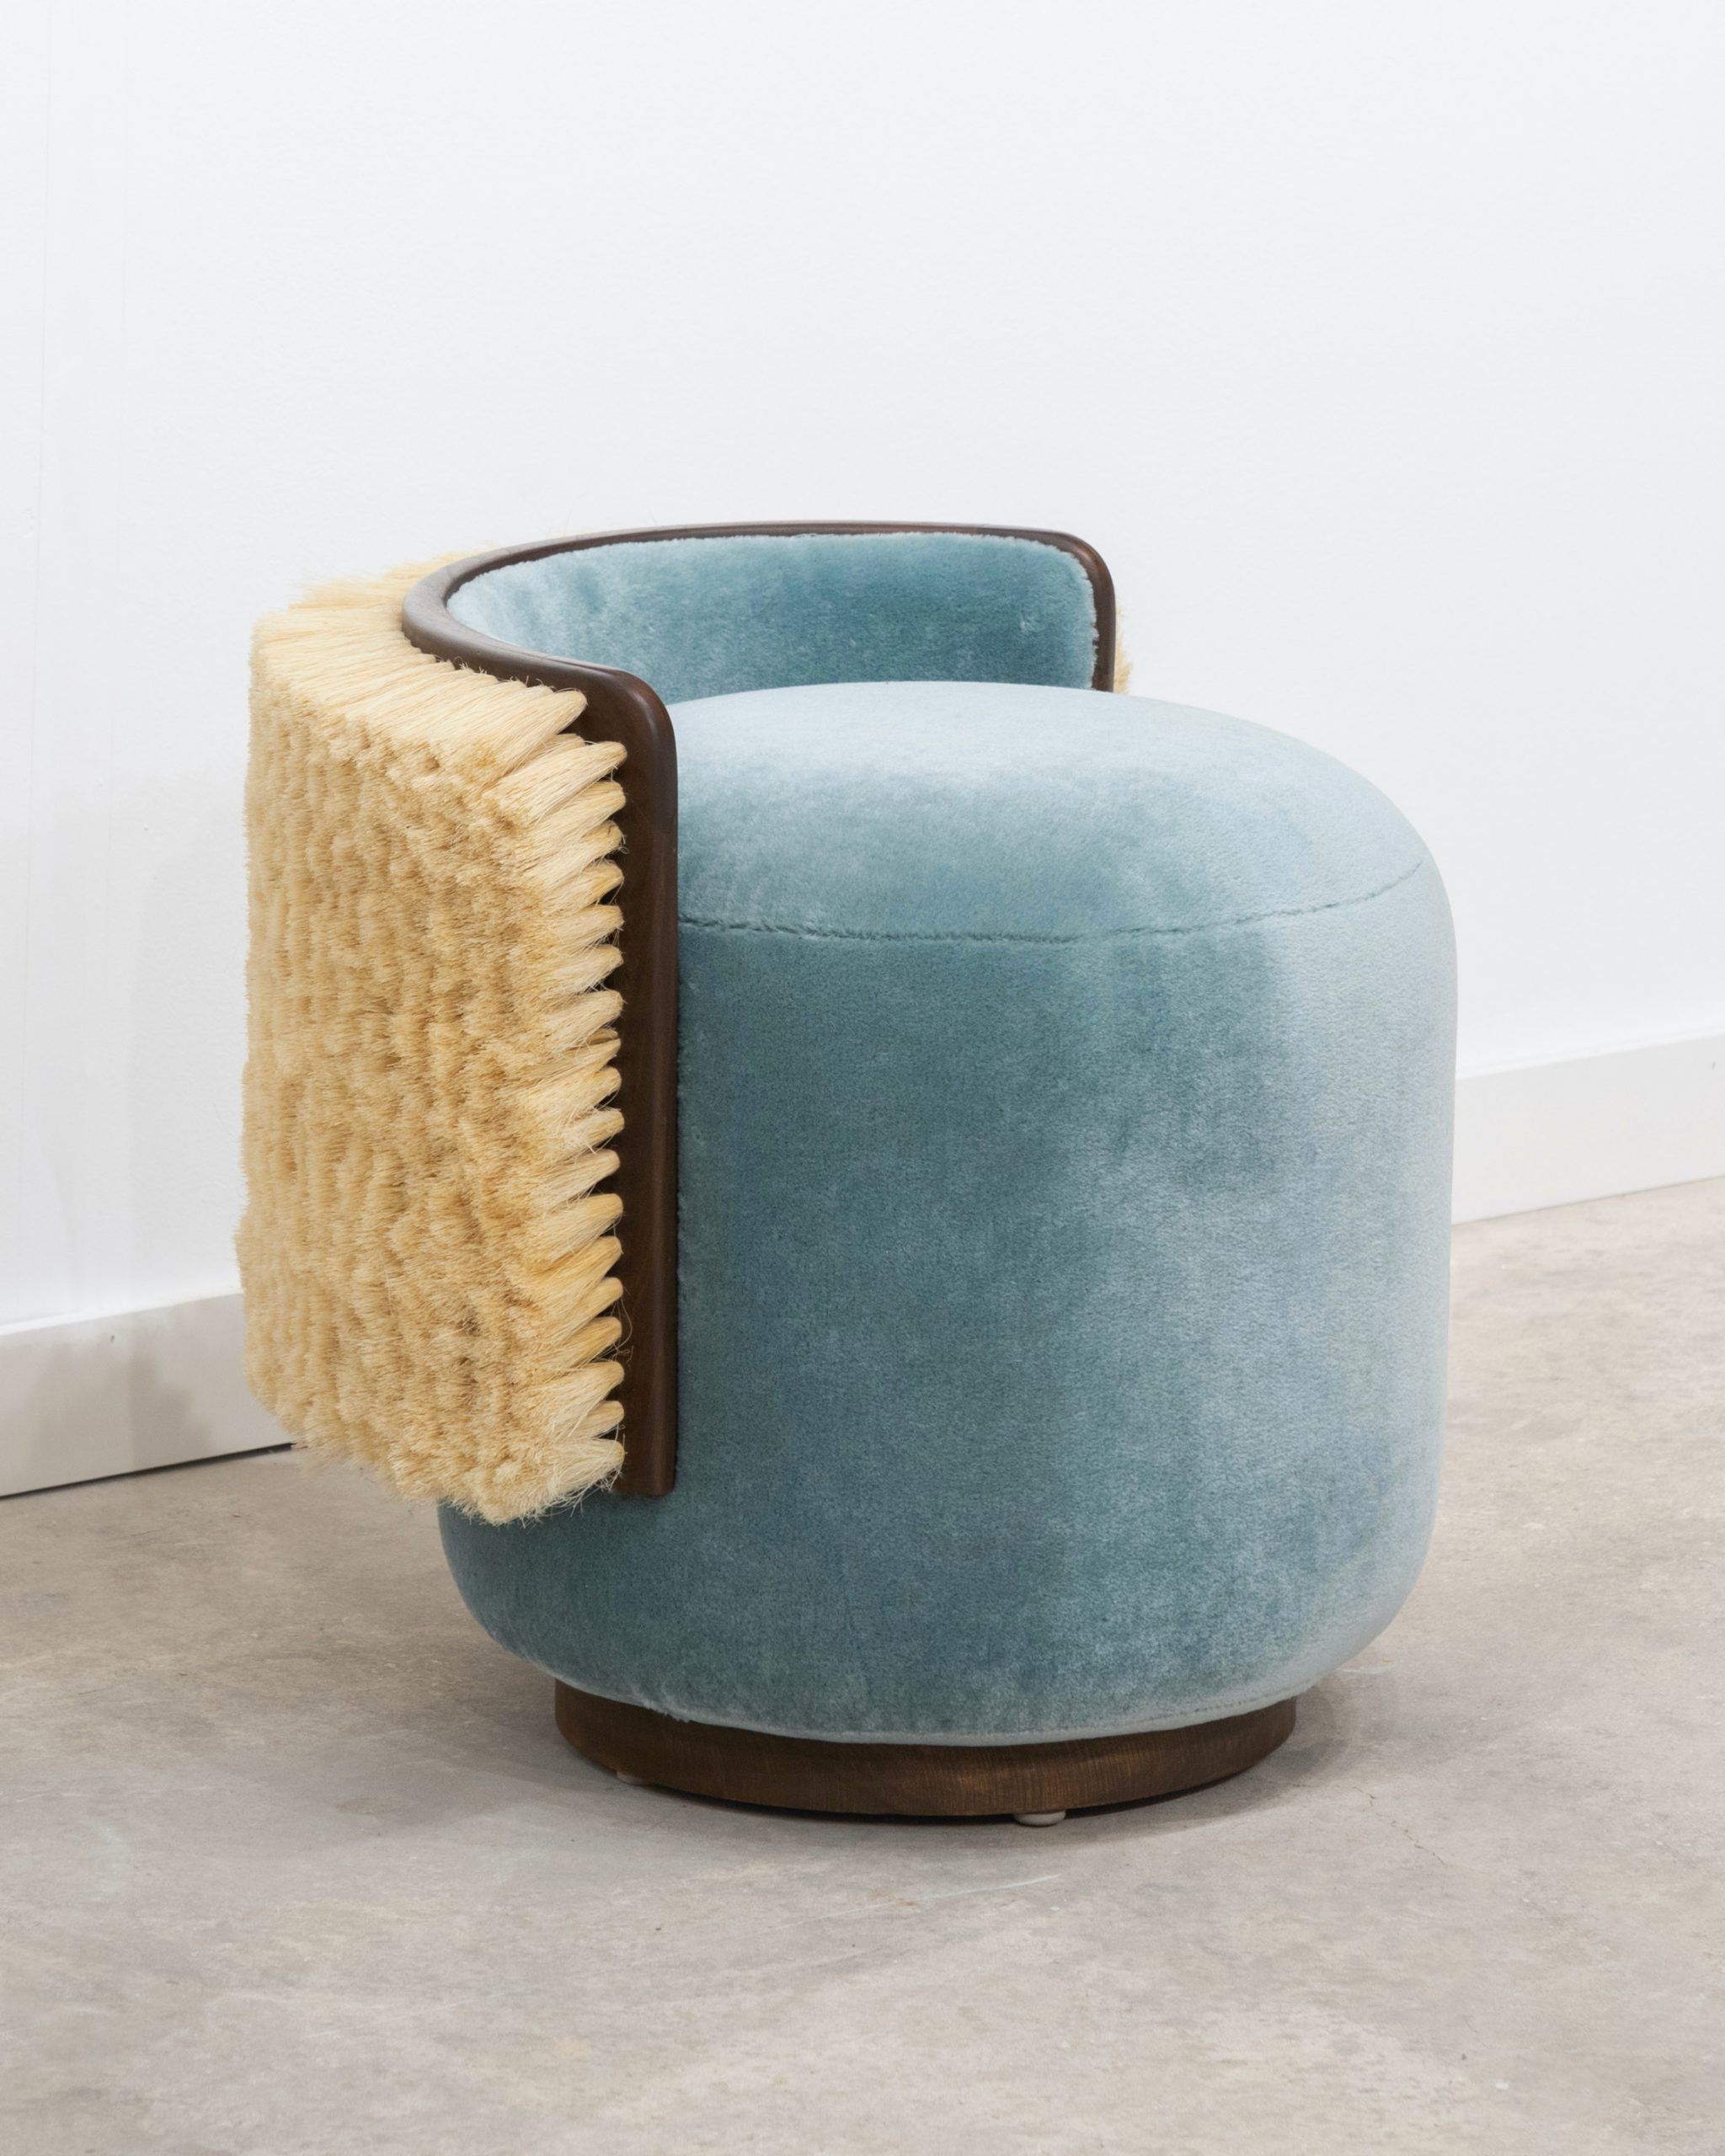 Ad Hoc Roots Stool Turquoise courtesy ammann//gallery